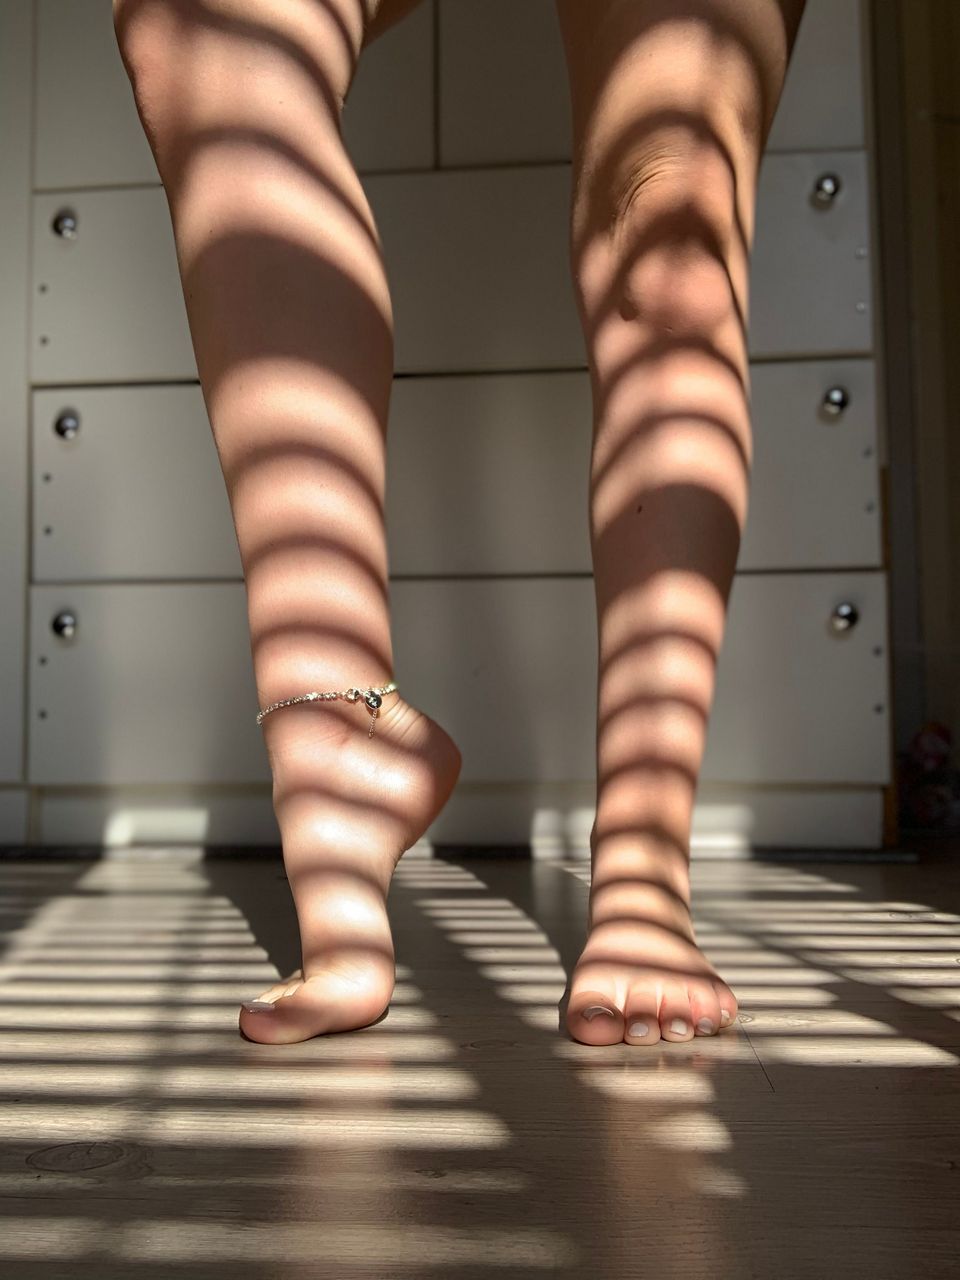 Stacey Lee Shadow Play And Dirty Feet